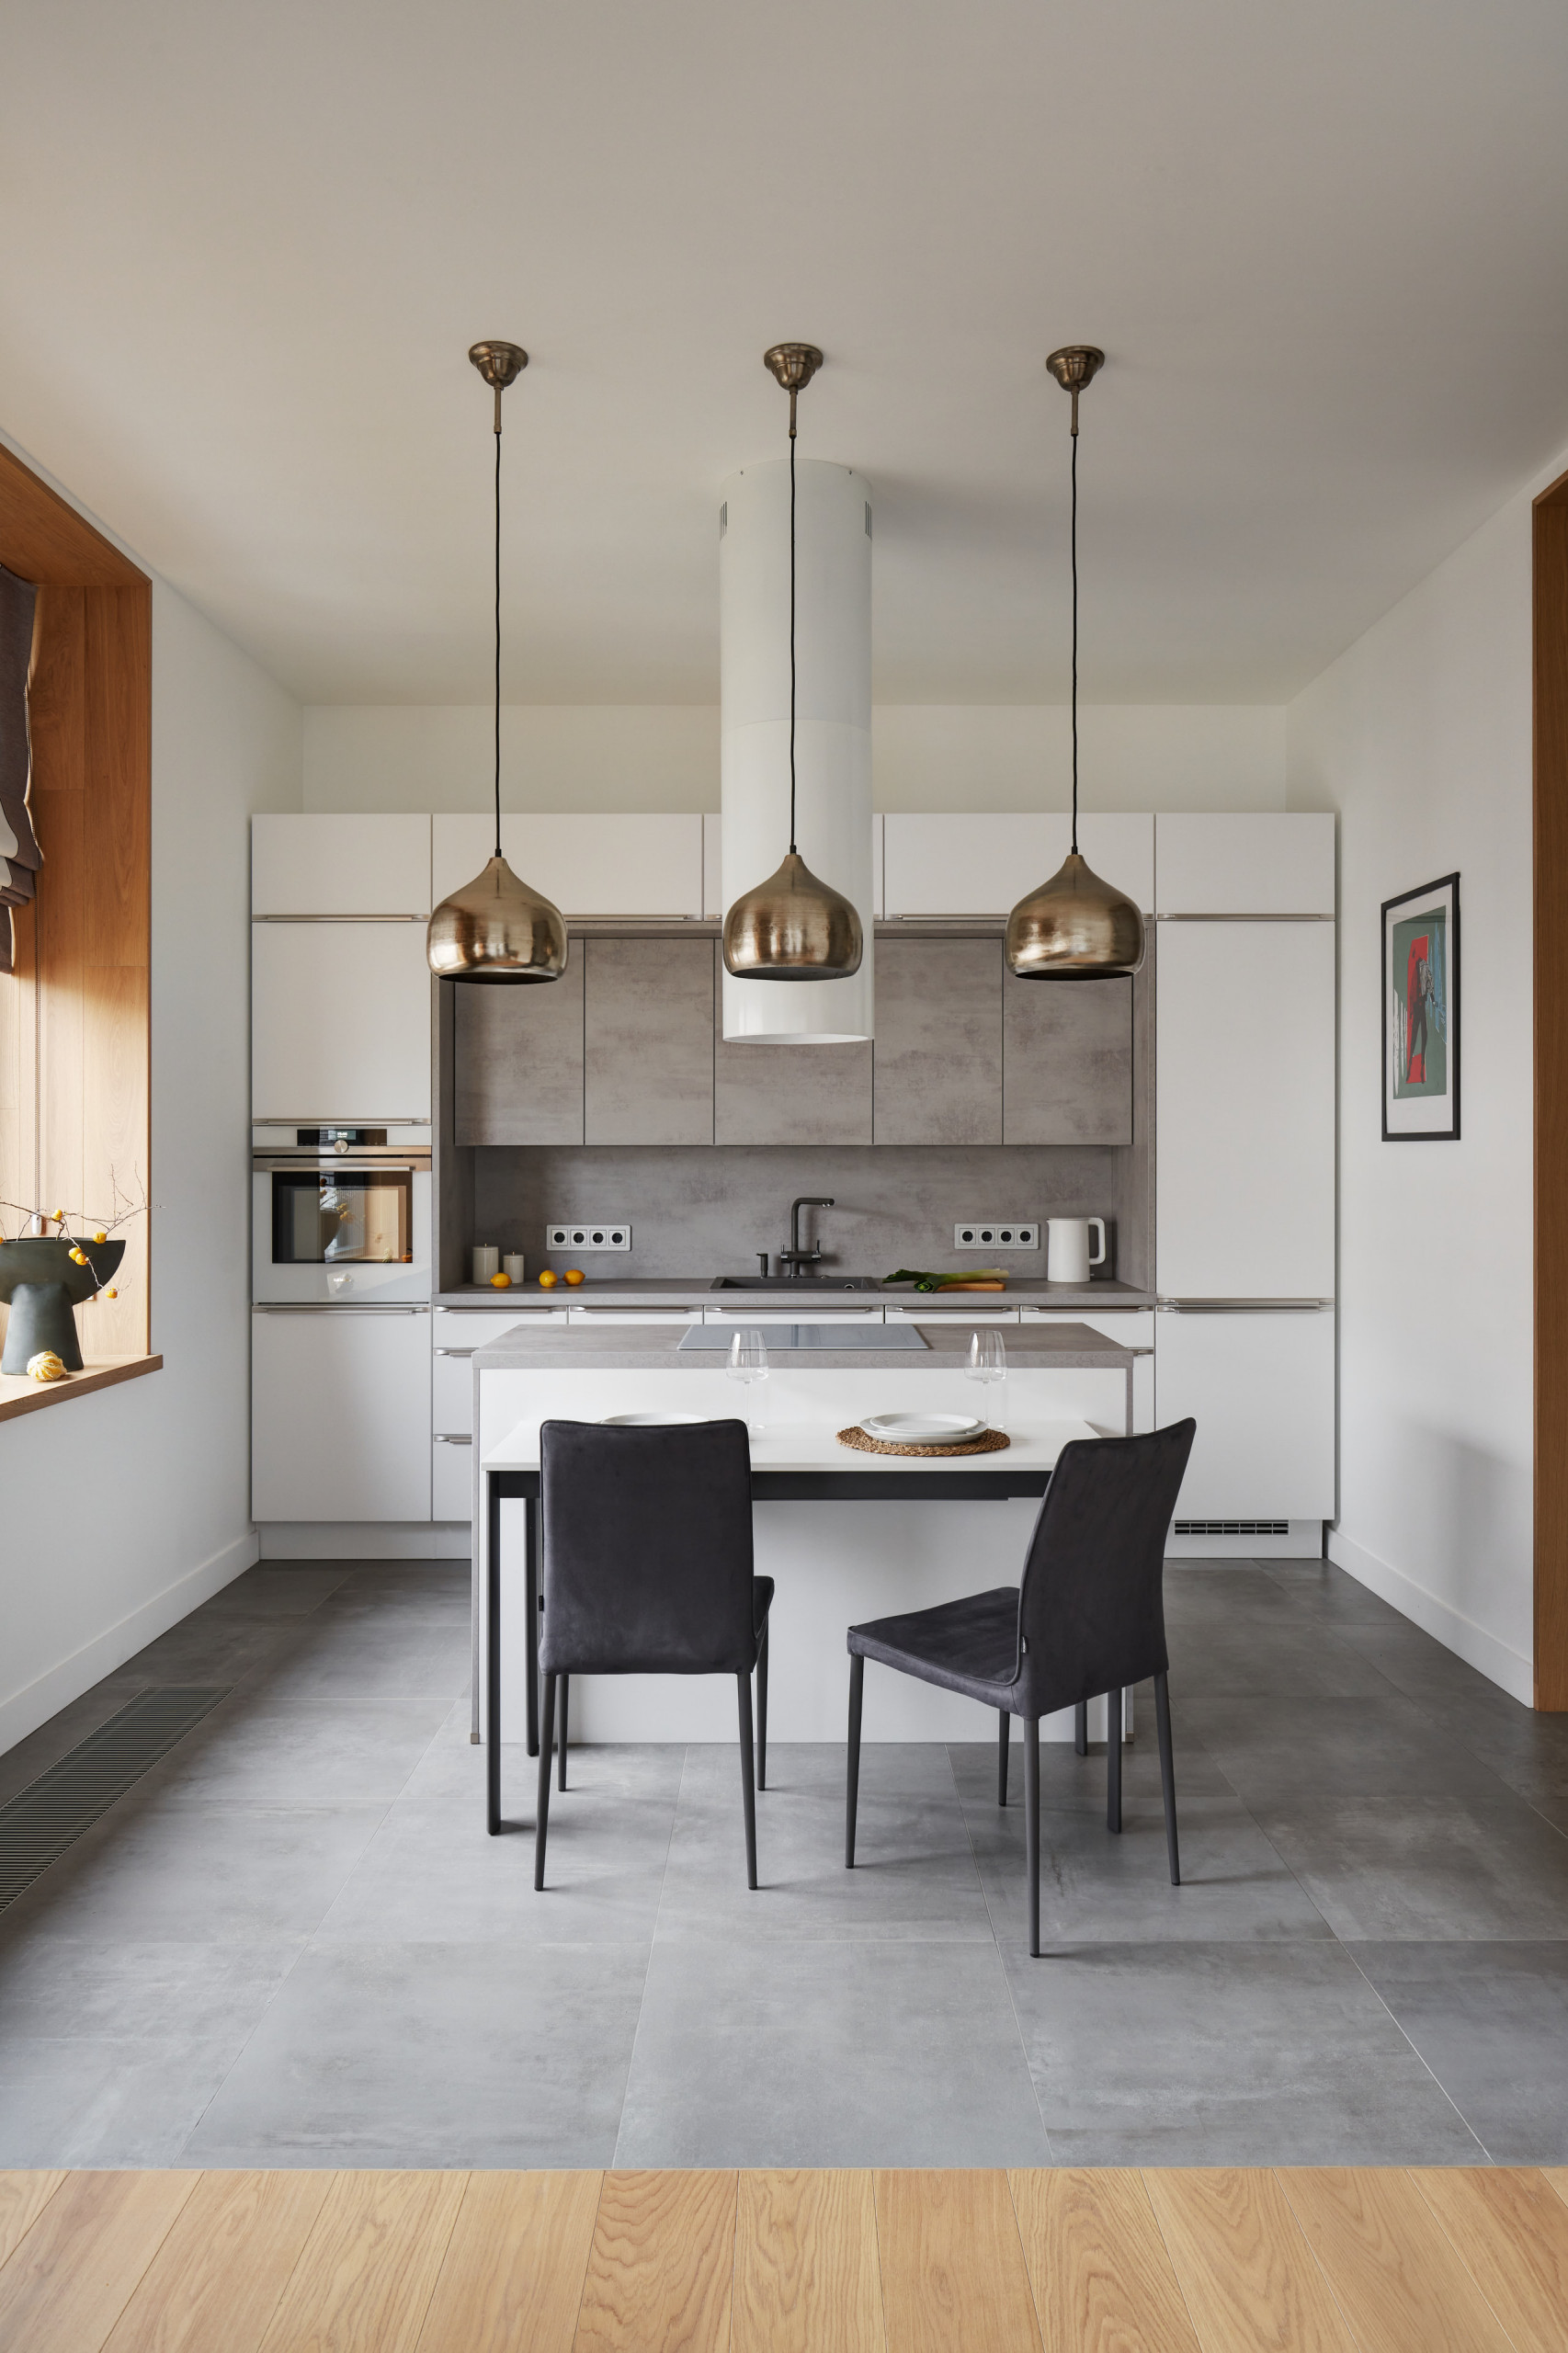 Black and white kitchens: Contemporary and ageless